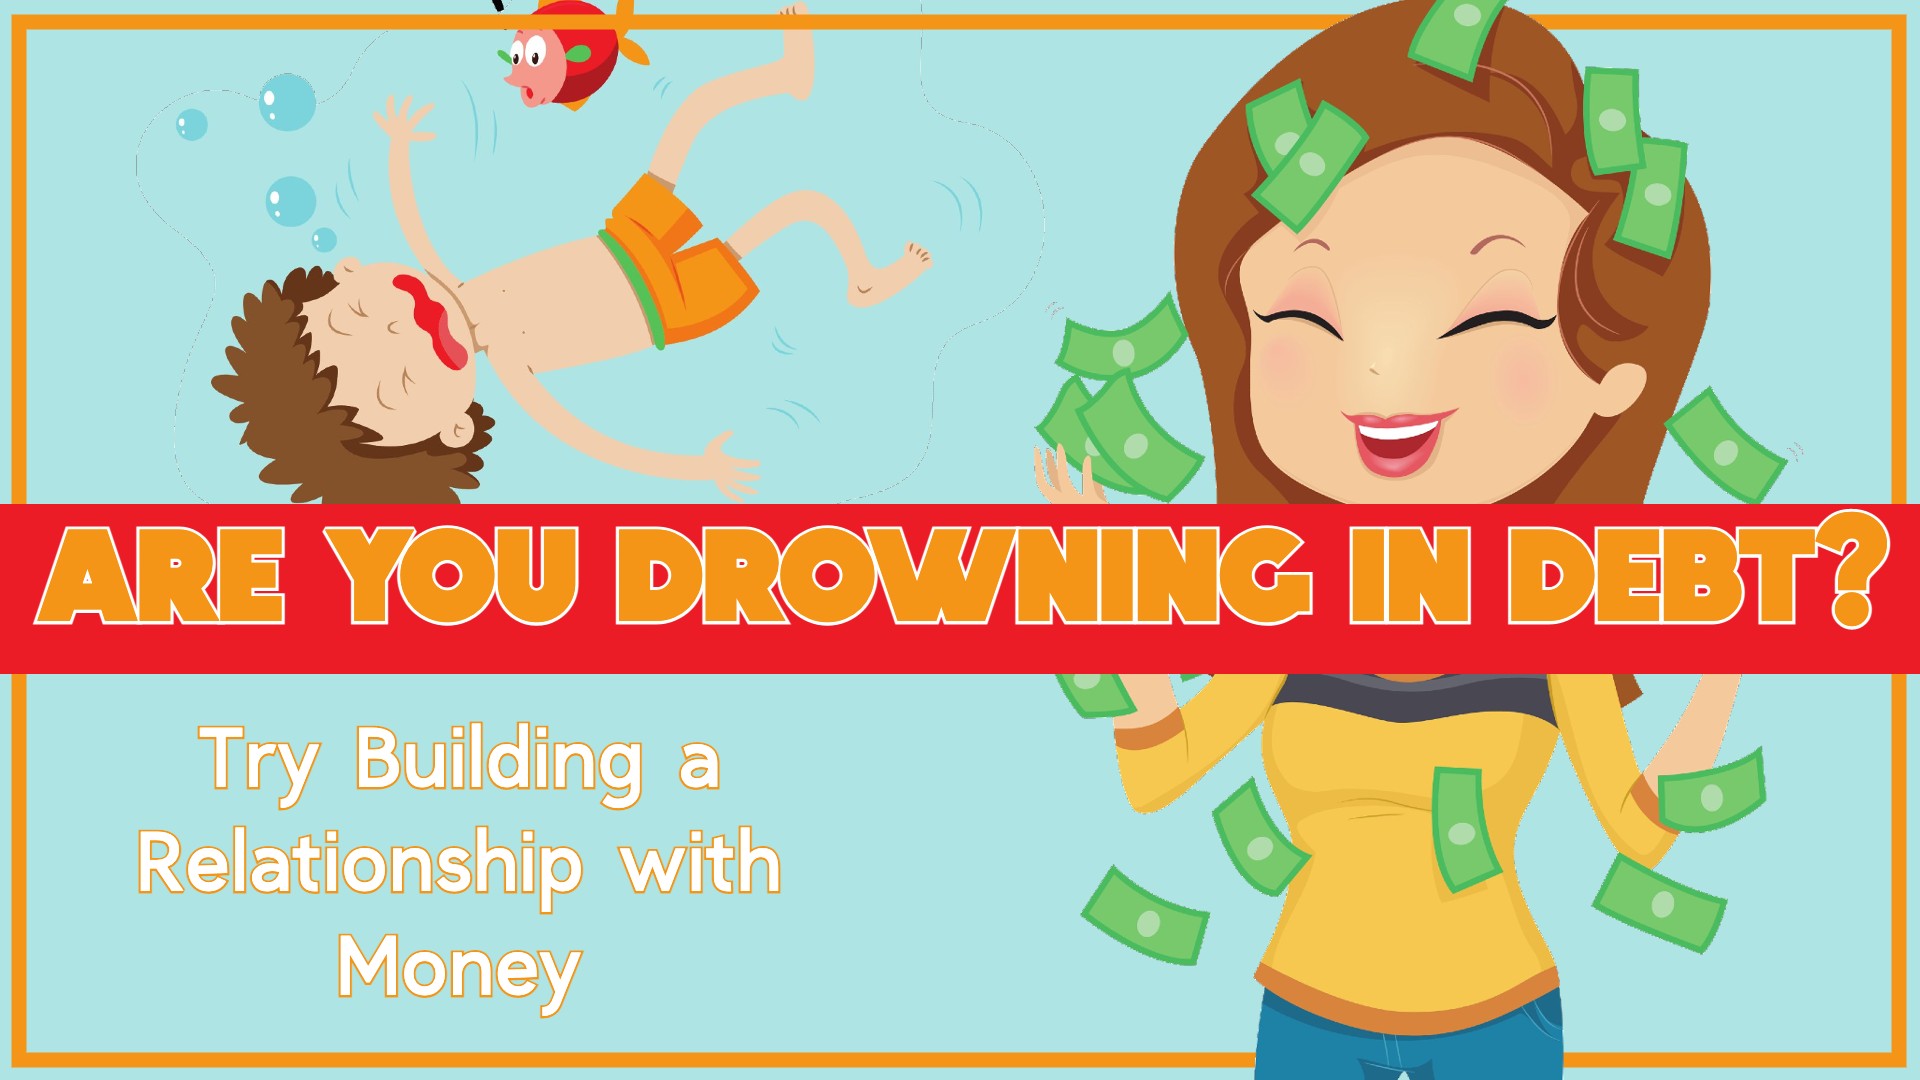 Are You Drowning in Debt? Try Building a Relationship with Money